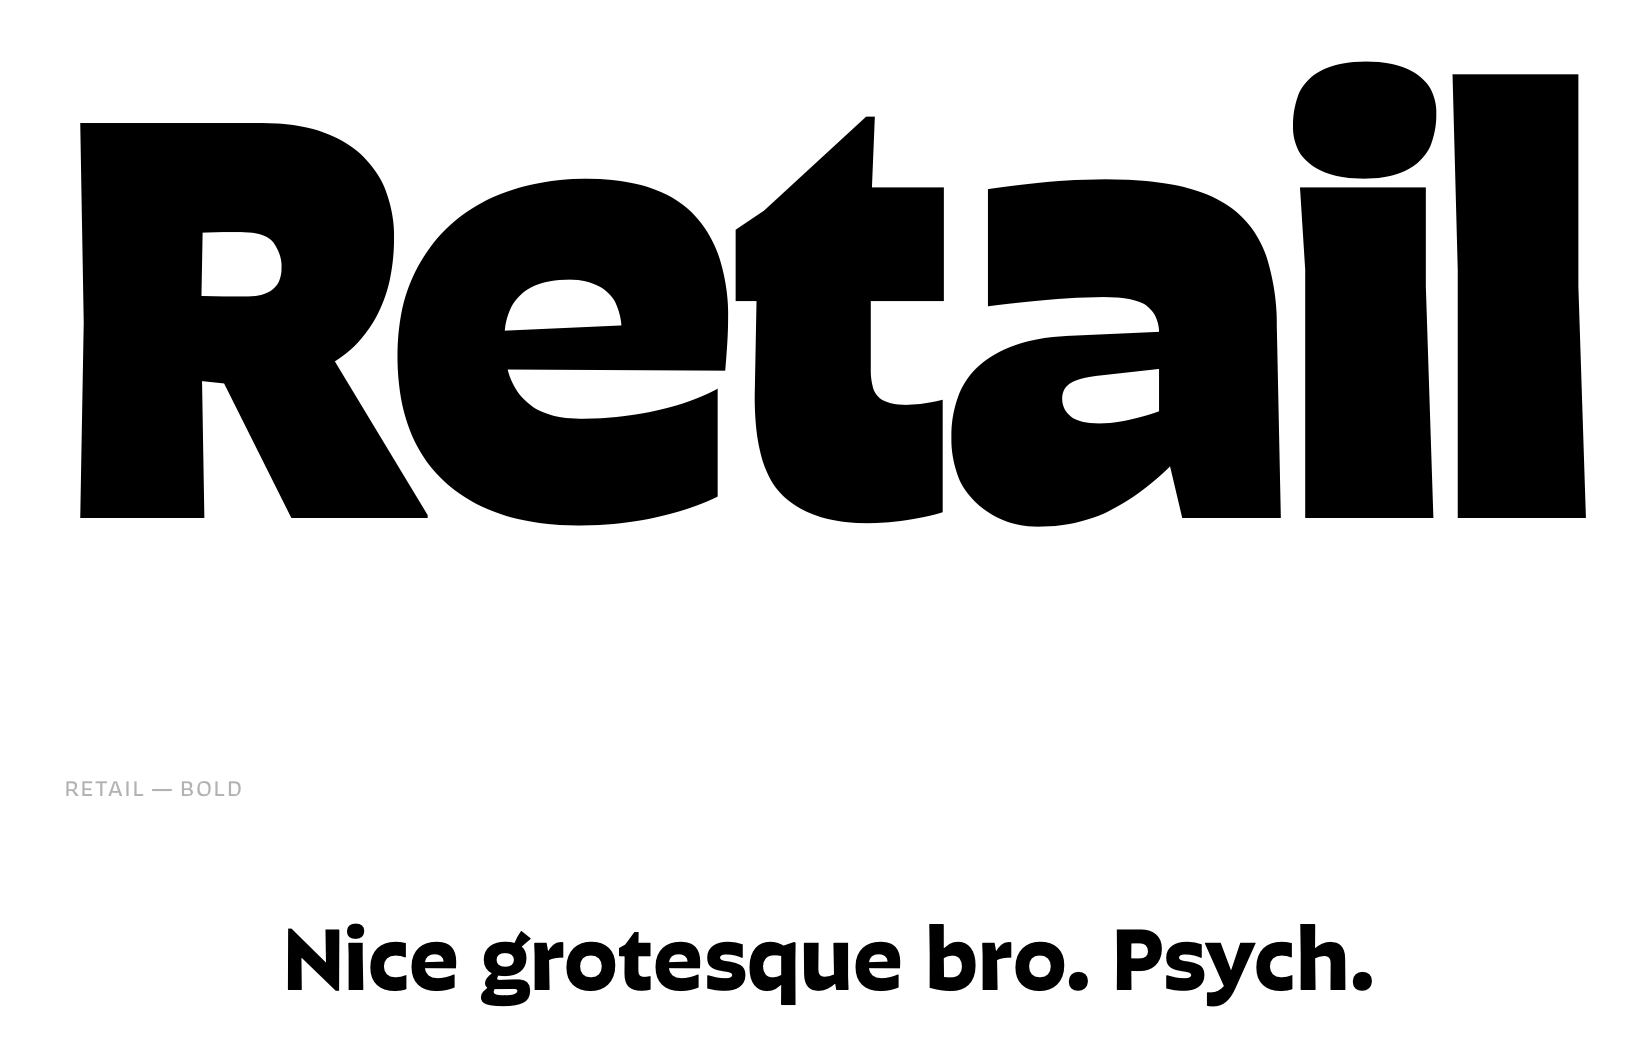 A specimen of the Retail typeface, once of the typography links in the list.